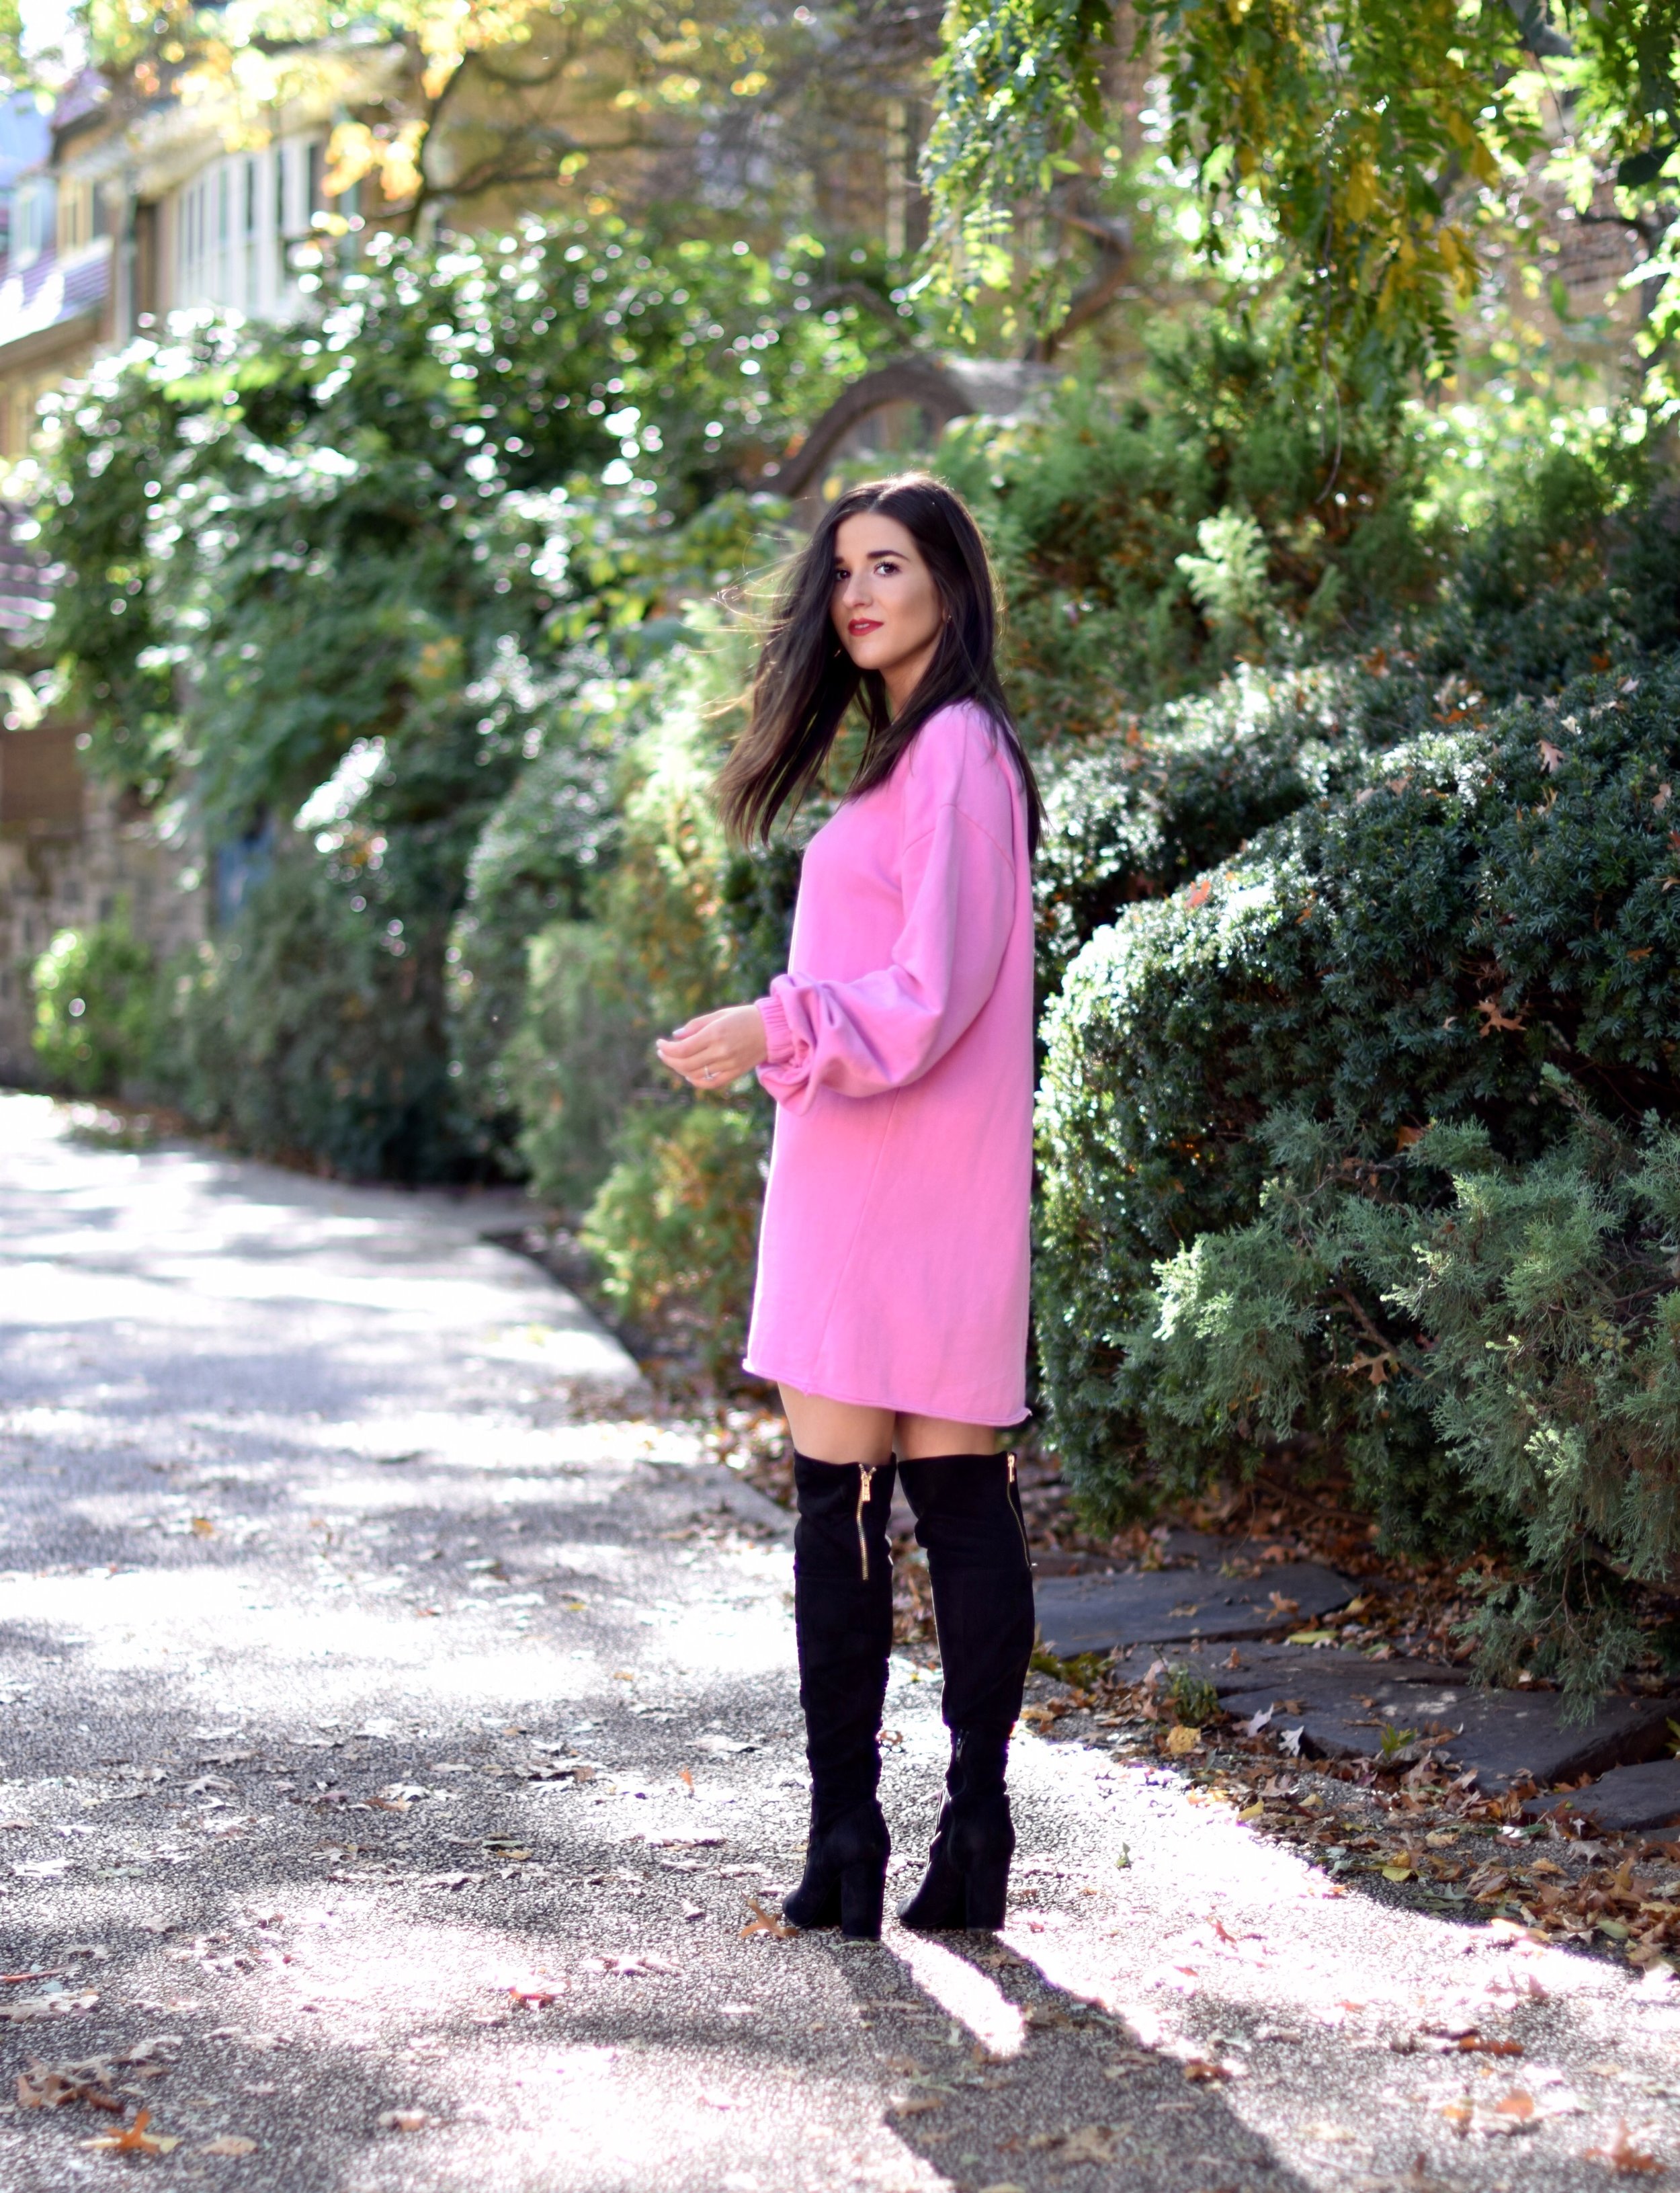 Pink Sweatshirt Dress Black OTK Boots Blogging Before The Days Of Instagram Esther Santer Fashion Blog NYC Street Style Blogger Outfit OOTD Trendy Over The Knee Hair Girl Women New York Chanel Bag Designer  ASOS Pretty Shopping Sale Beautiful Winter.jpg